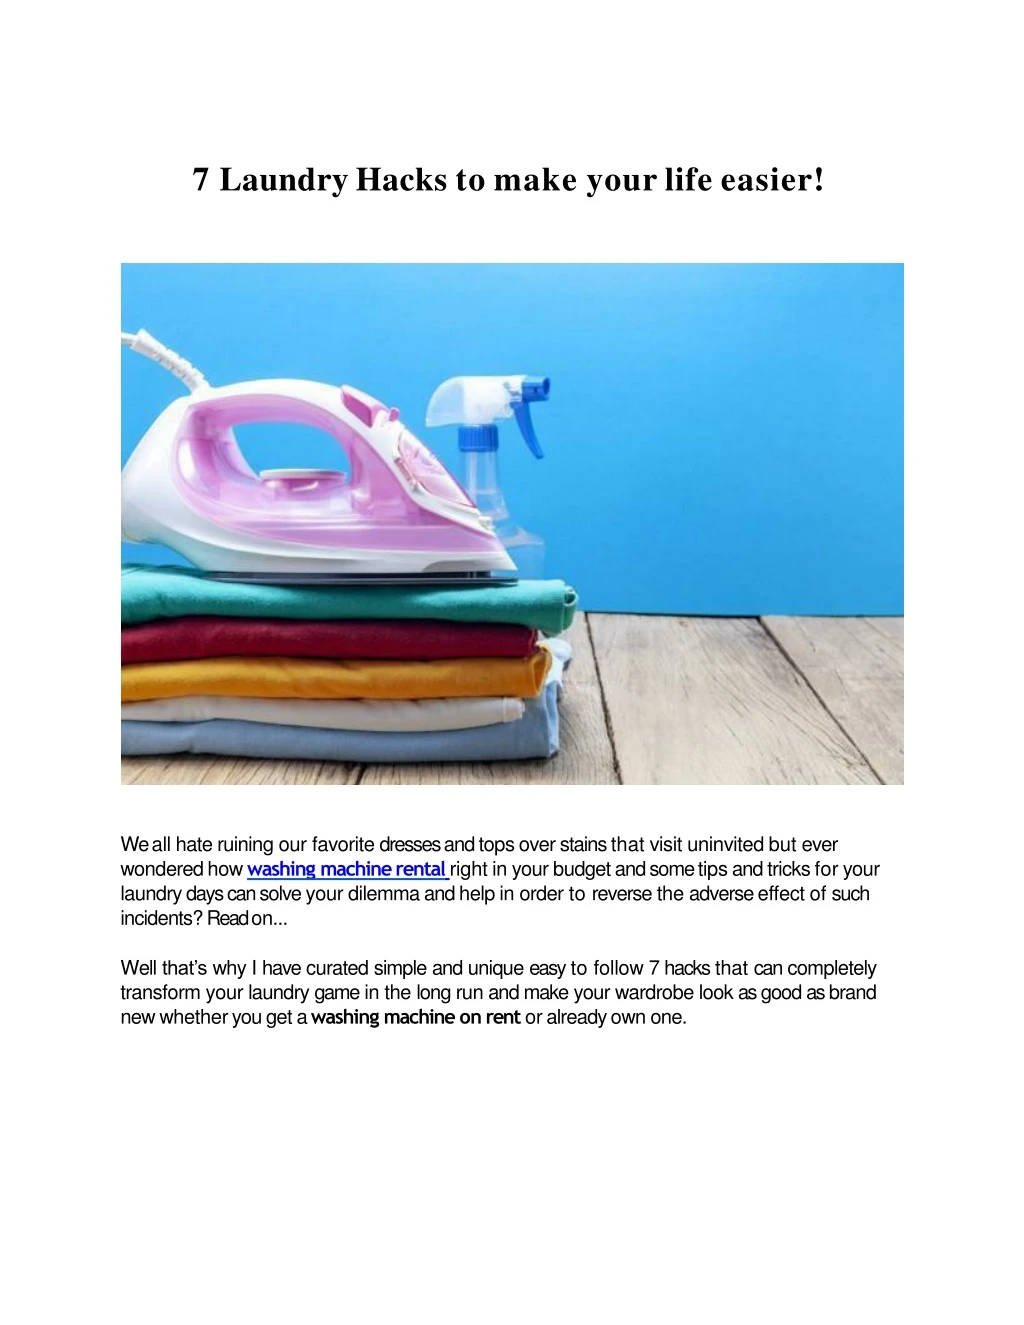 7 laundry hacks to make your life easier